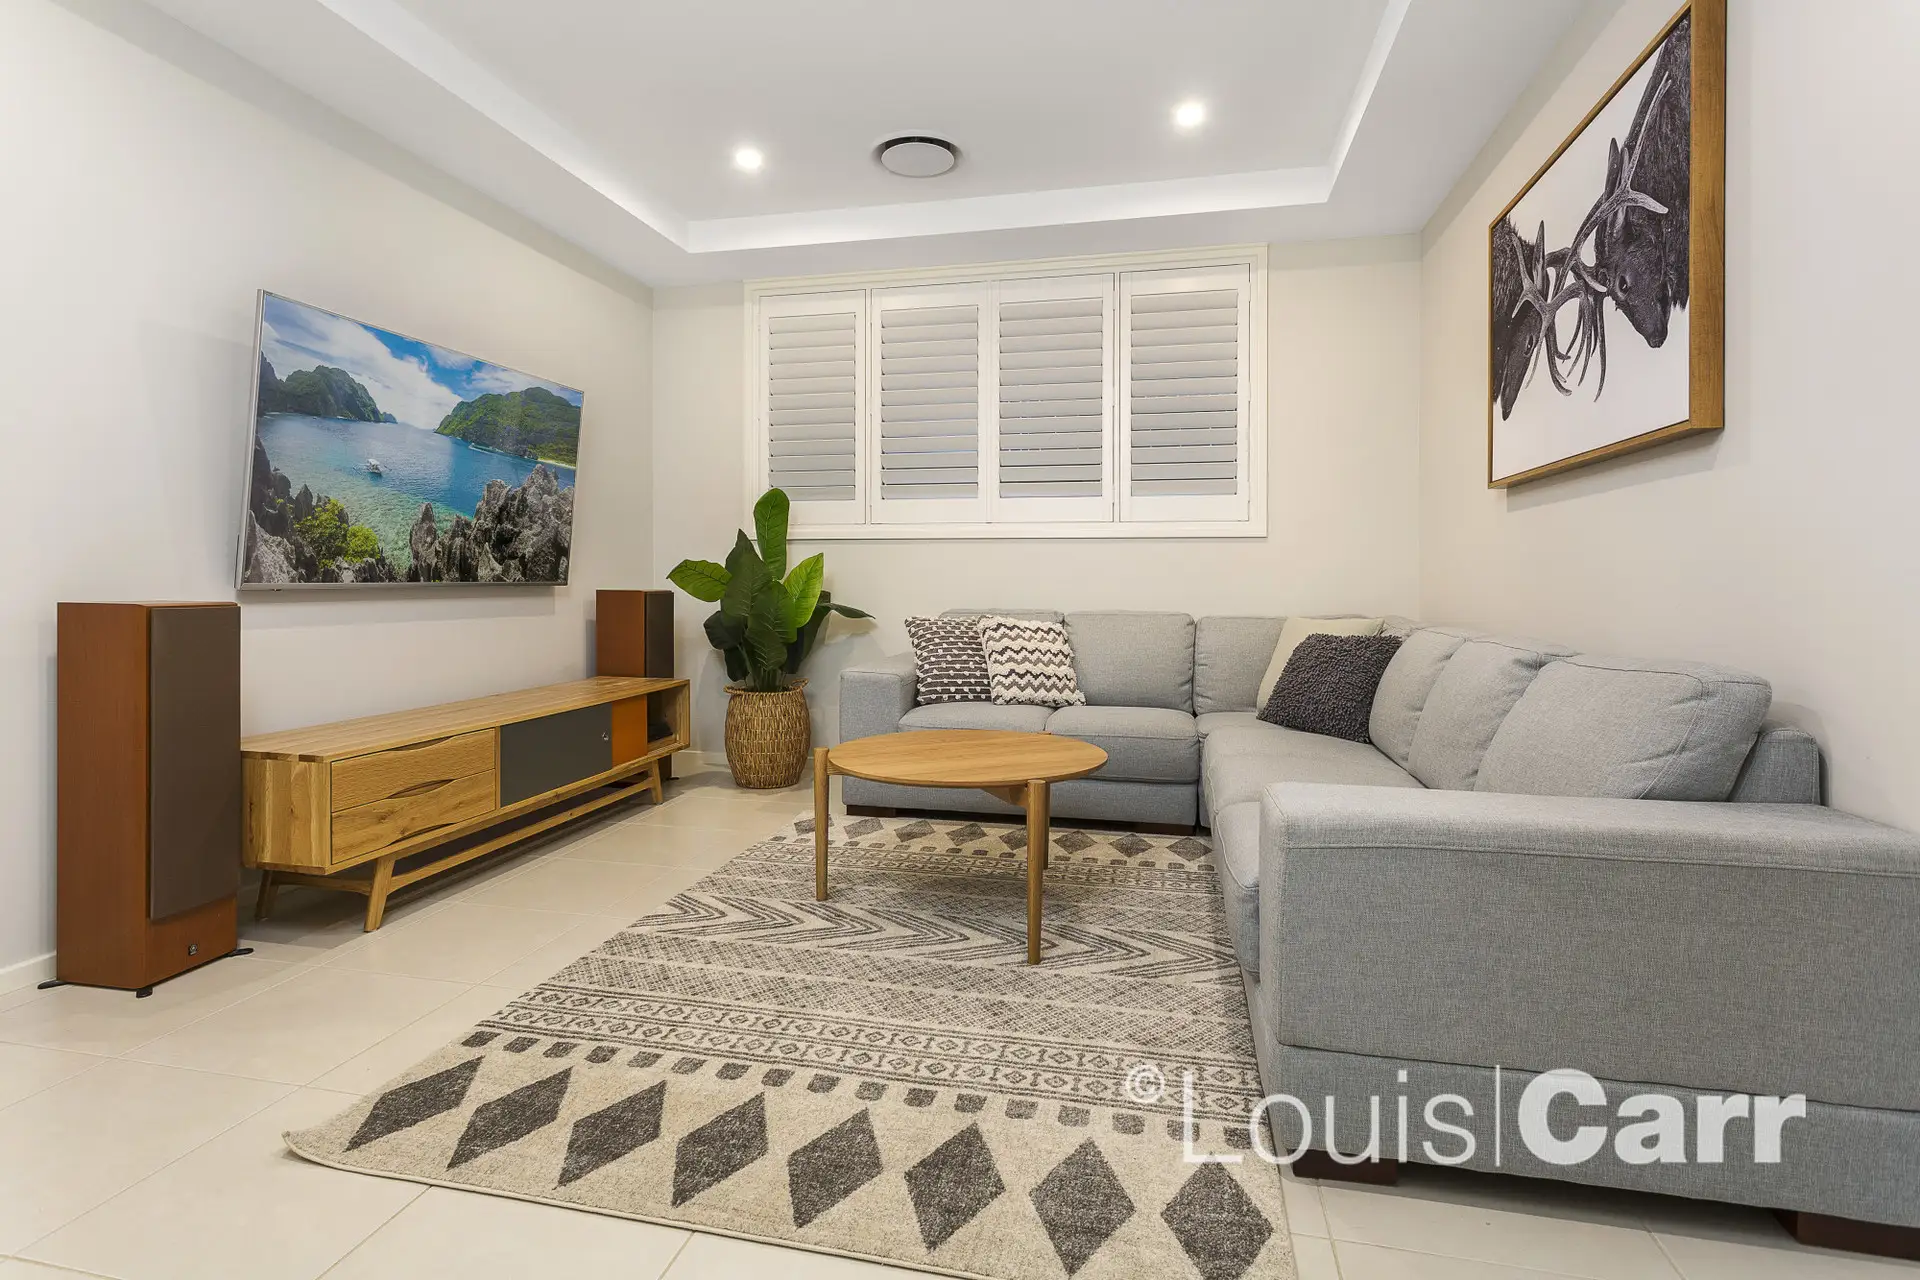 Photo #5: 6 Goongarrie Street, North Kellyville - Sold by Louis Carr Real Estate